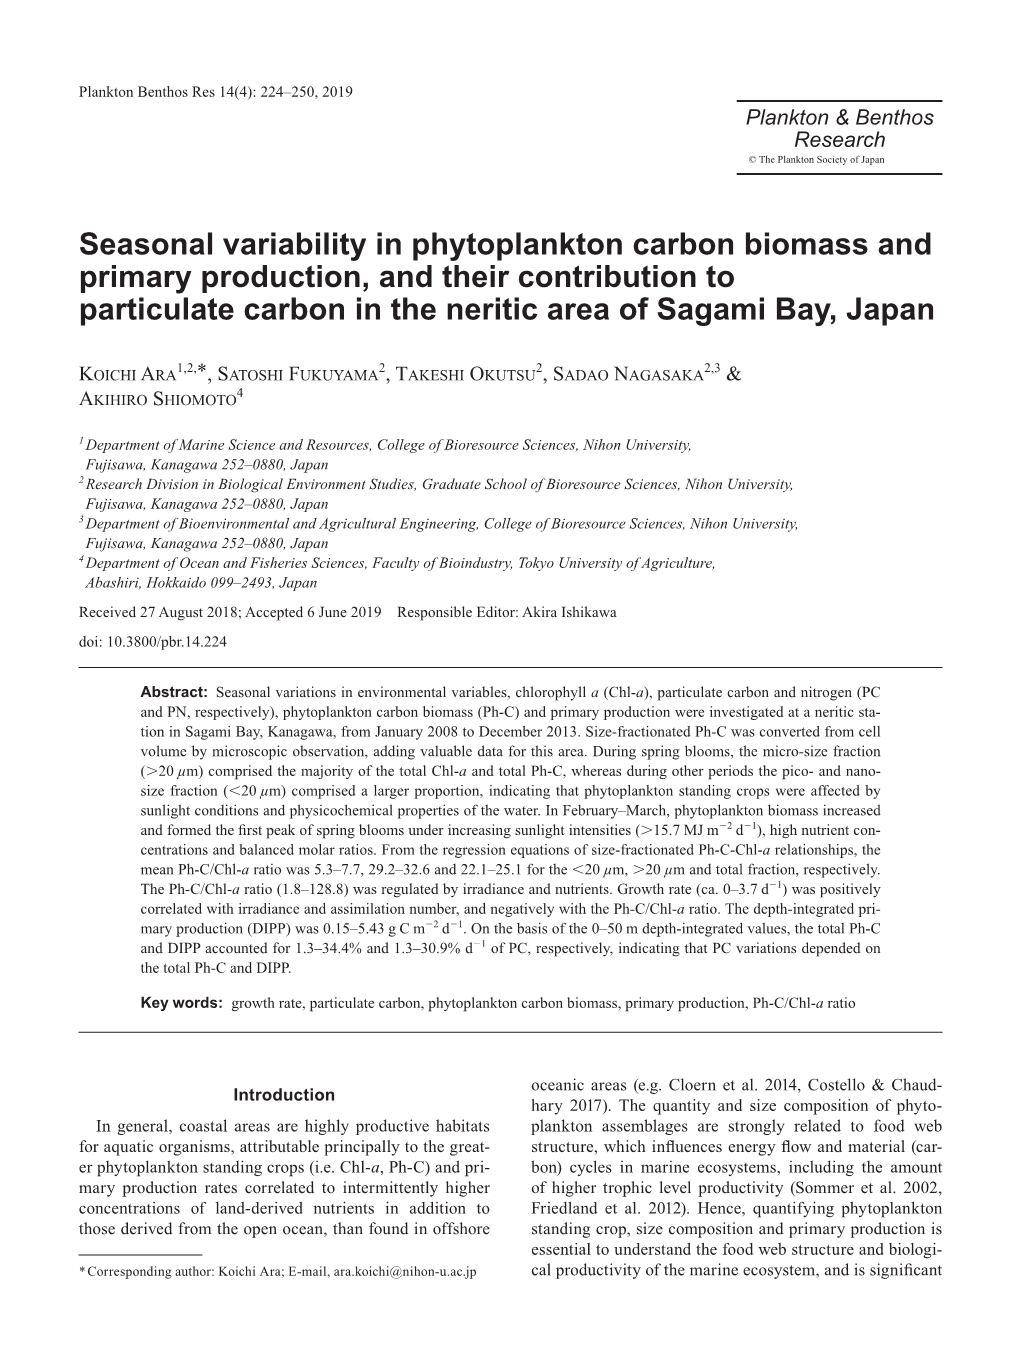 Seasonal Variability in Phytoplankton Carbon Biomass and Primary Production, and Their Contribution to Particulate Carbon in the Neritic Area of Sagami Bay, Japan